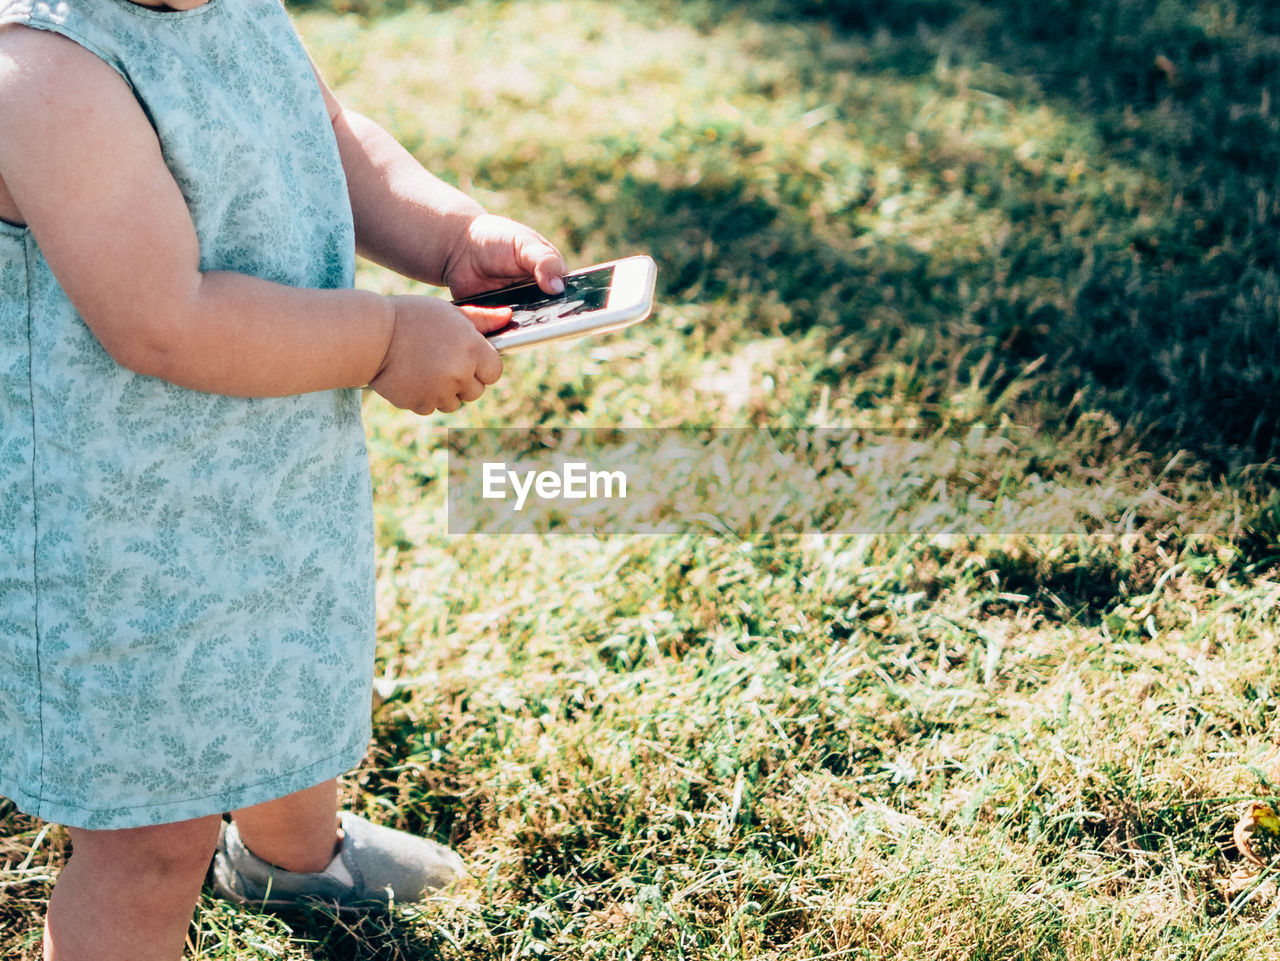 Child using mobile phone in grass field